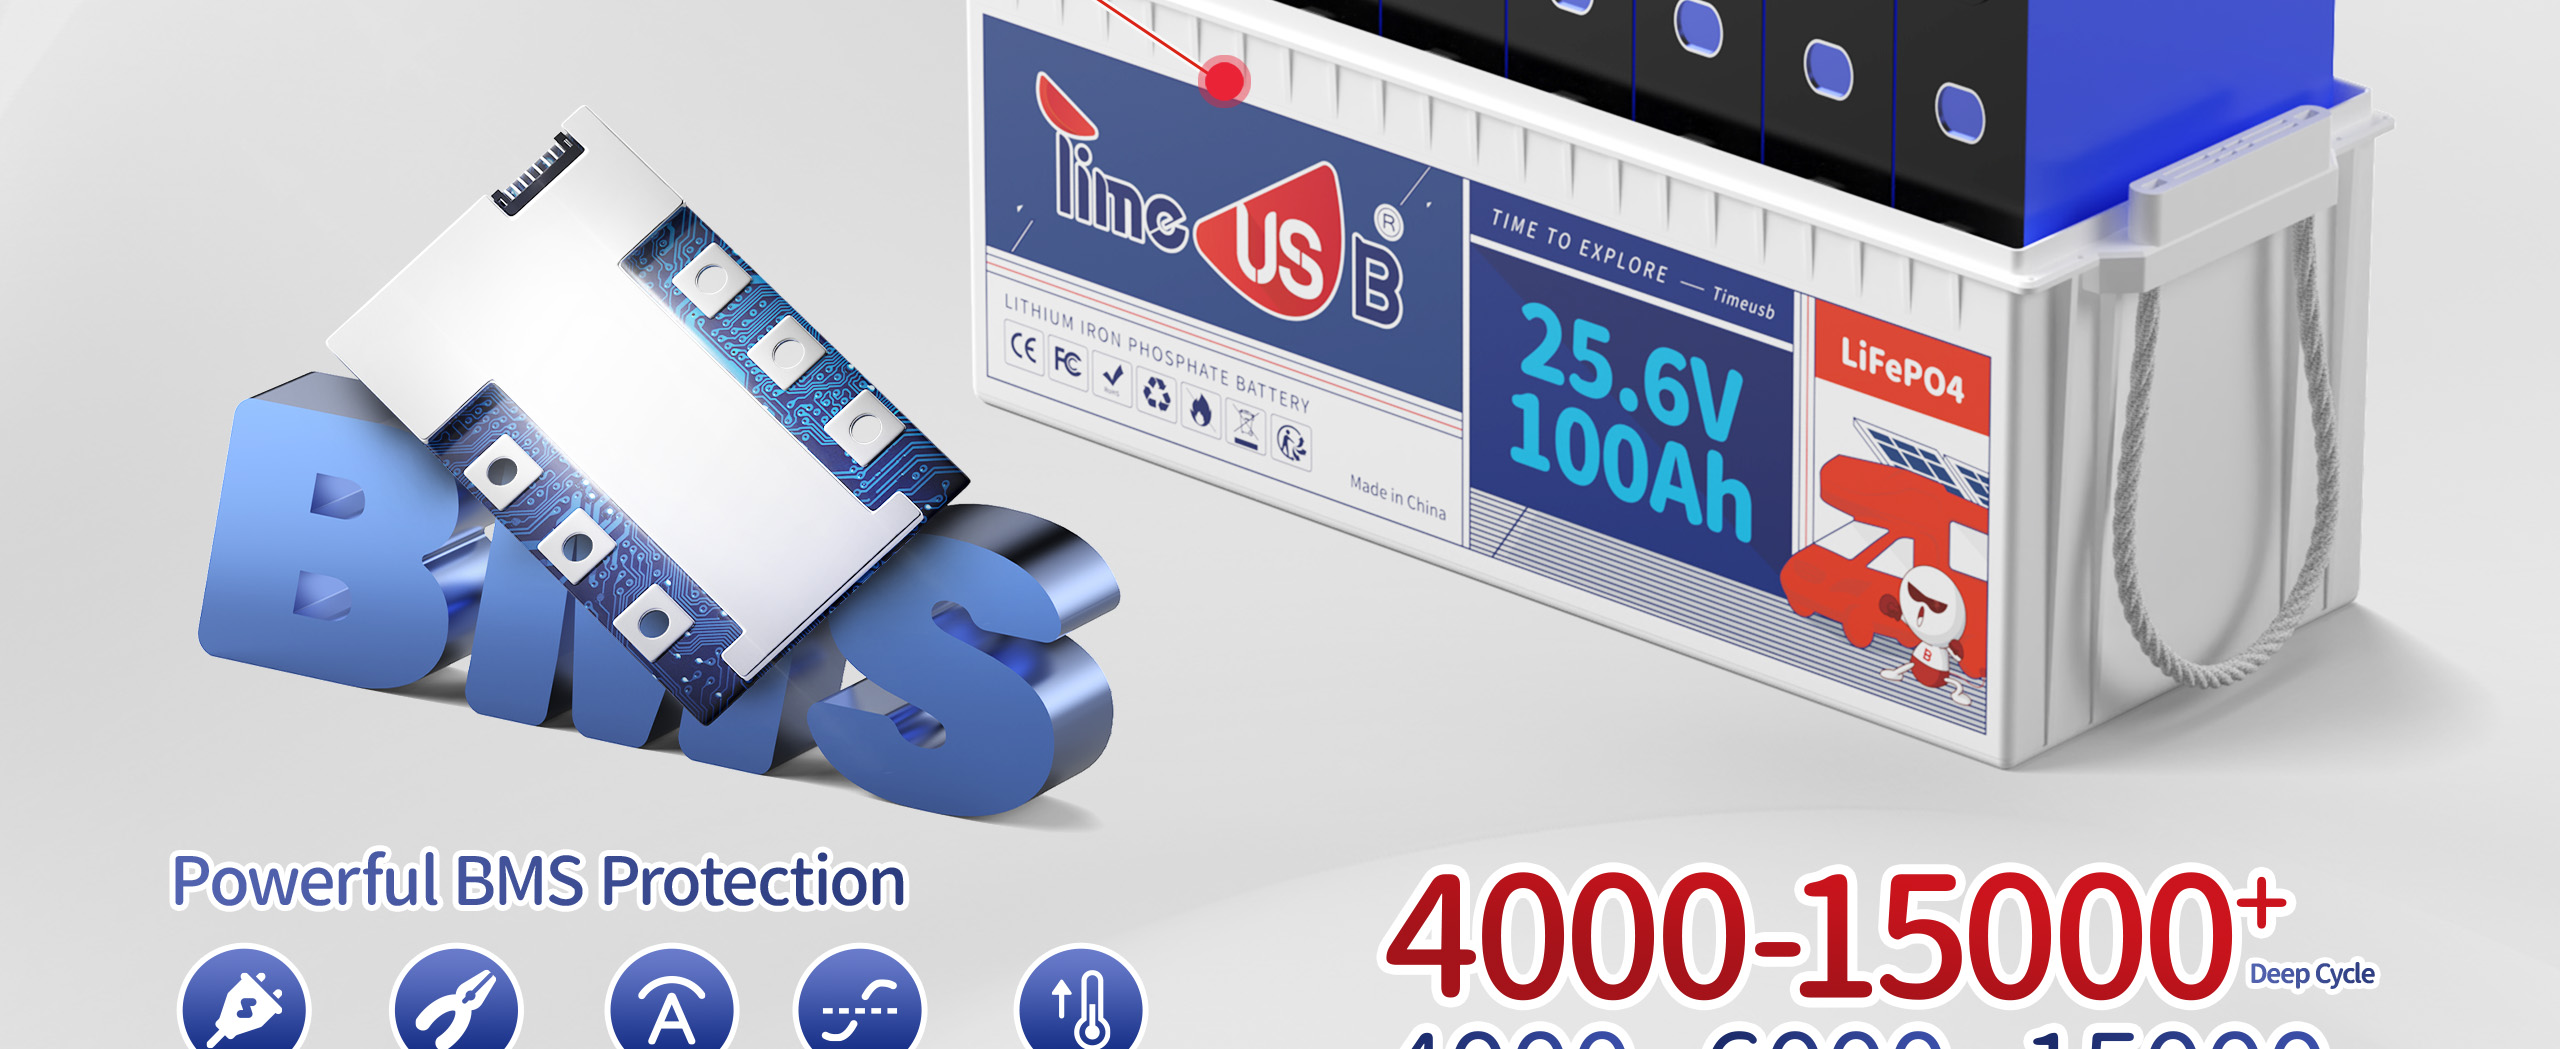 BMS protection of Timeusb 24V 100Ah LiFePO4 Lithium Battery